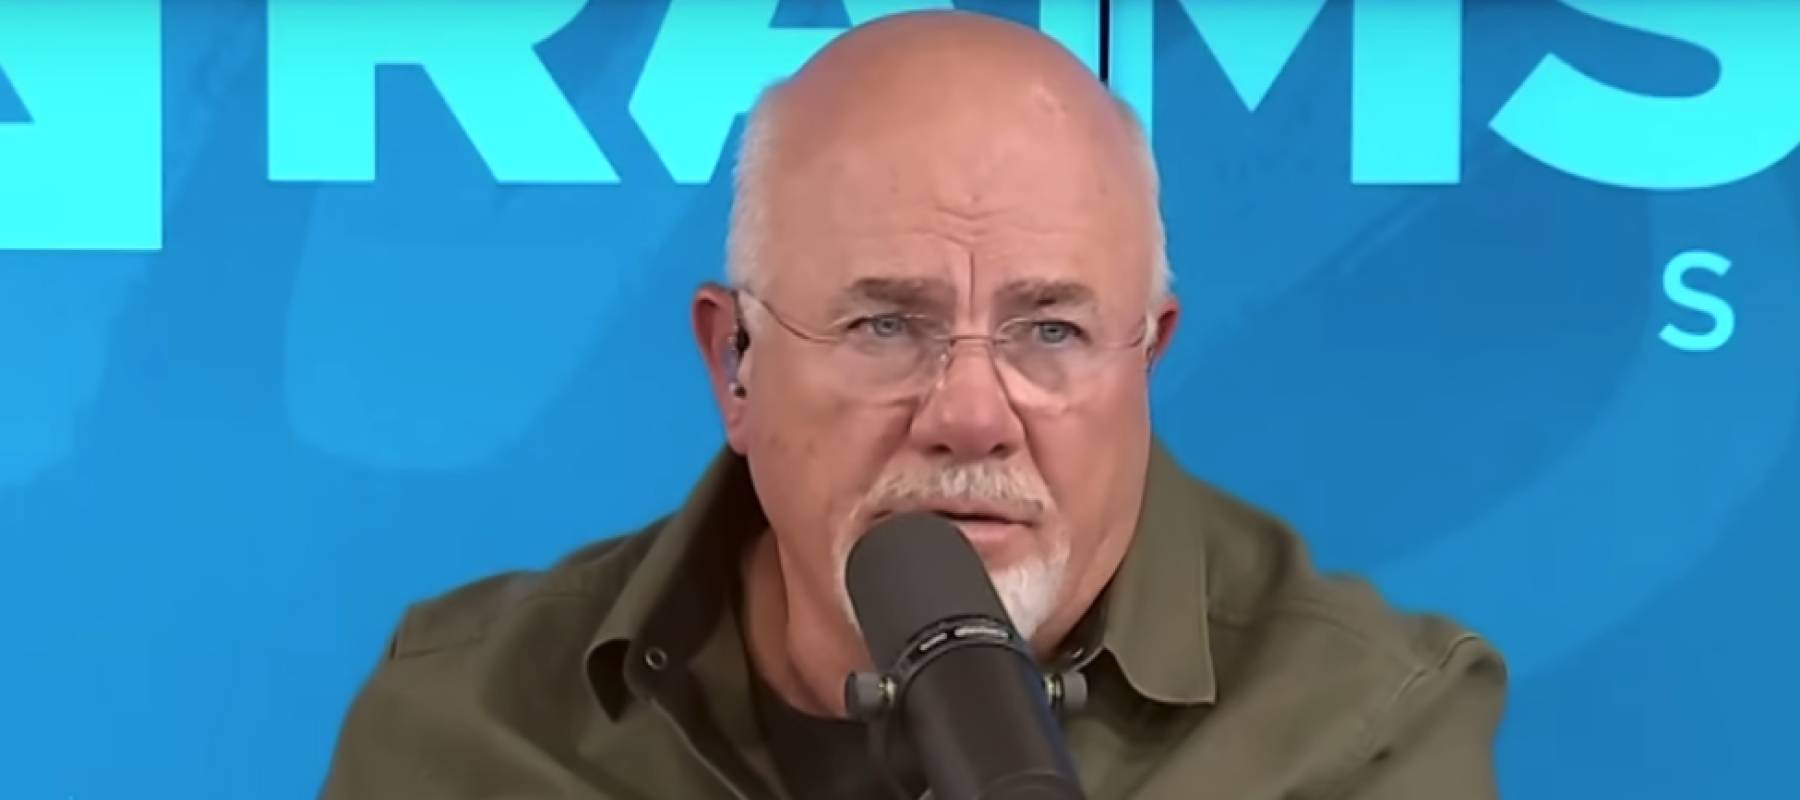 Dave Ramsey makes a dramatic face while speaking into microphone on set of his podcast.